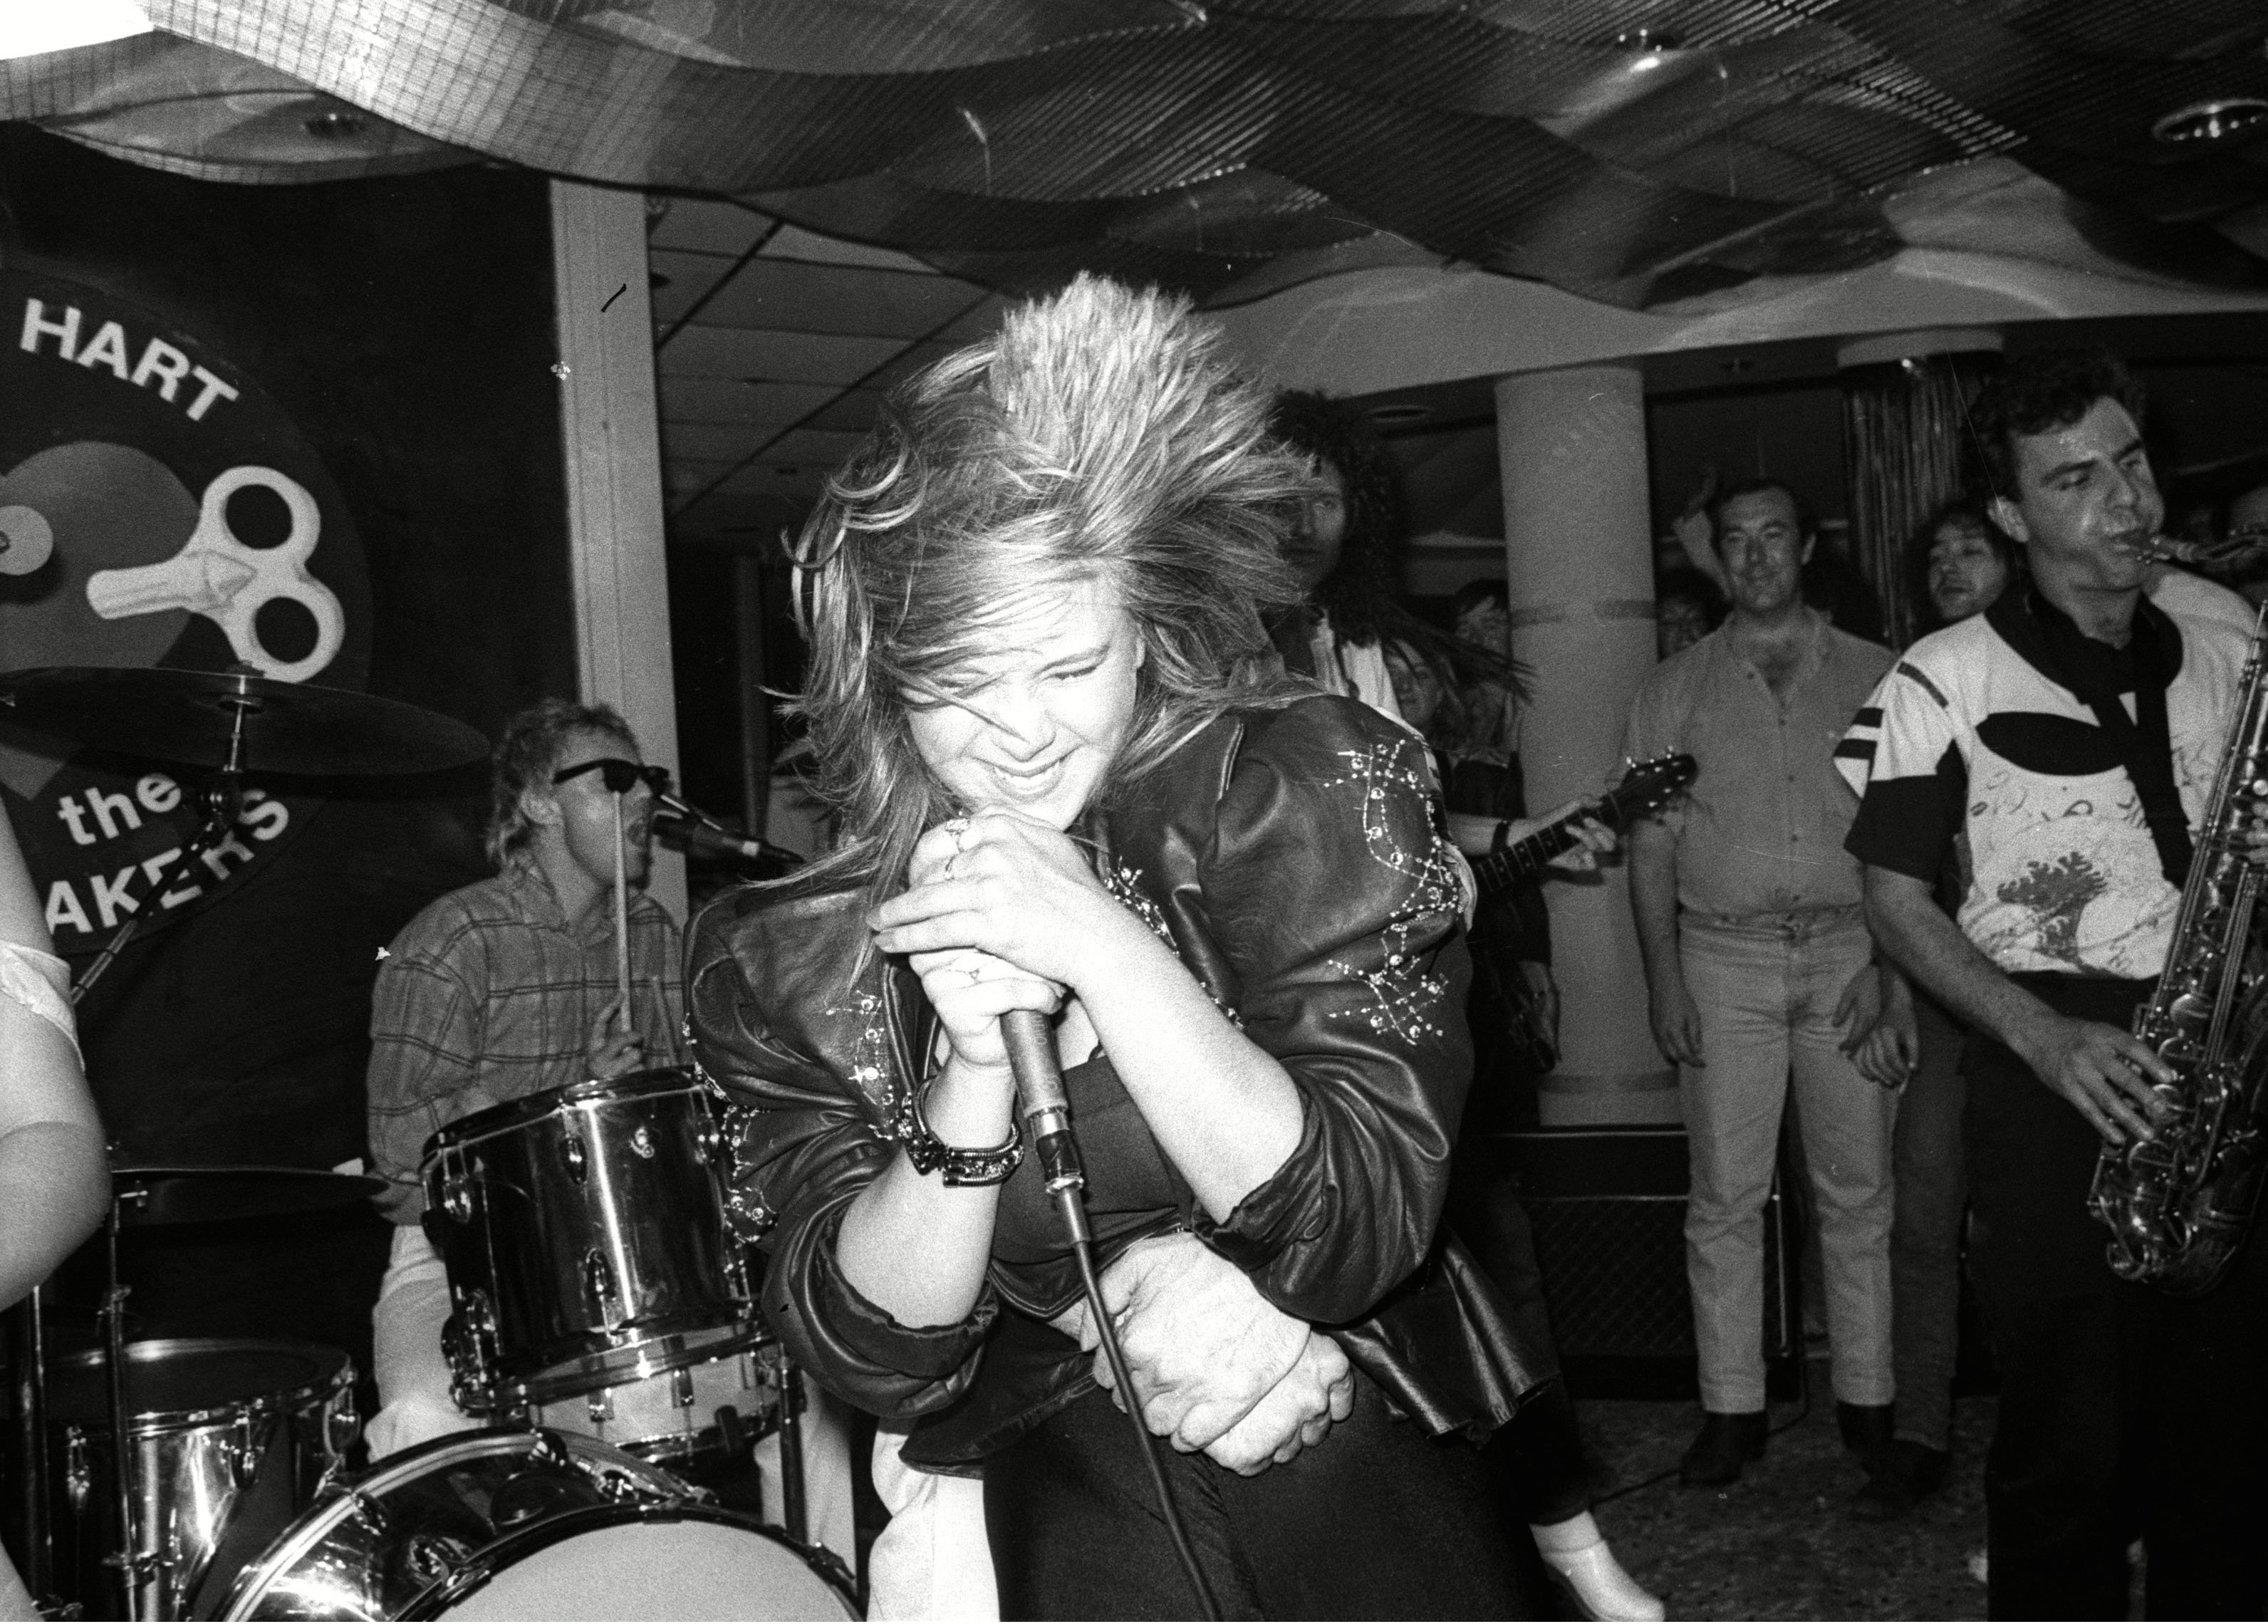 Party at the Kensington Roof Gardens Freddie Mercury with Samantha Fox Queen Hold A Private Concert and Party and Were Billed As 'Dicky Heart and the Pacemakers' at the Kensington Roof Gardens - 11 Jul 1986